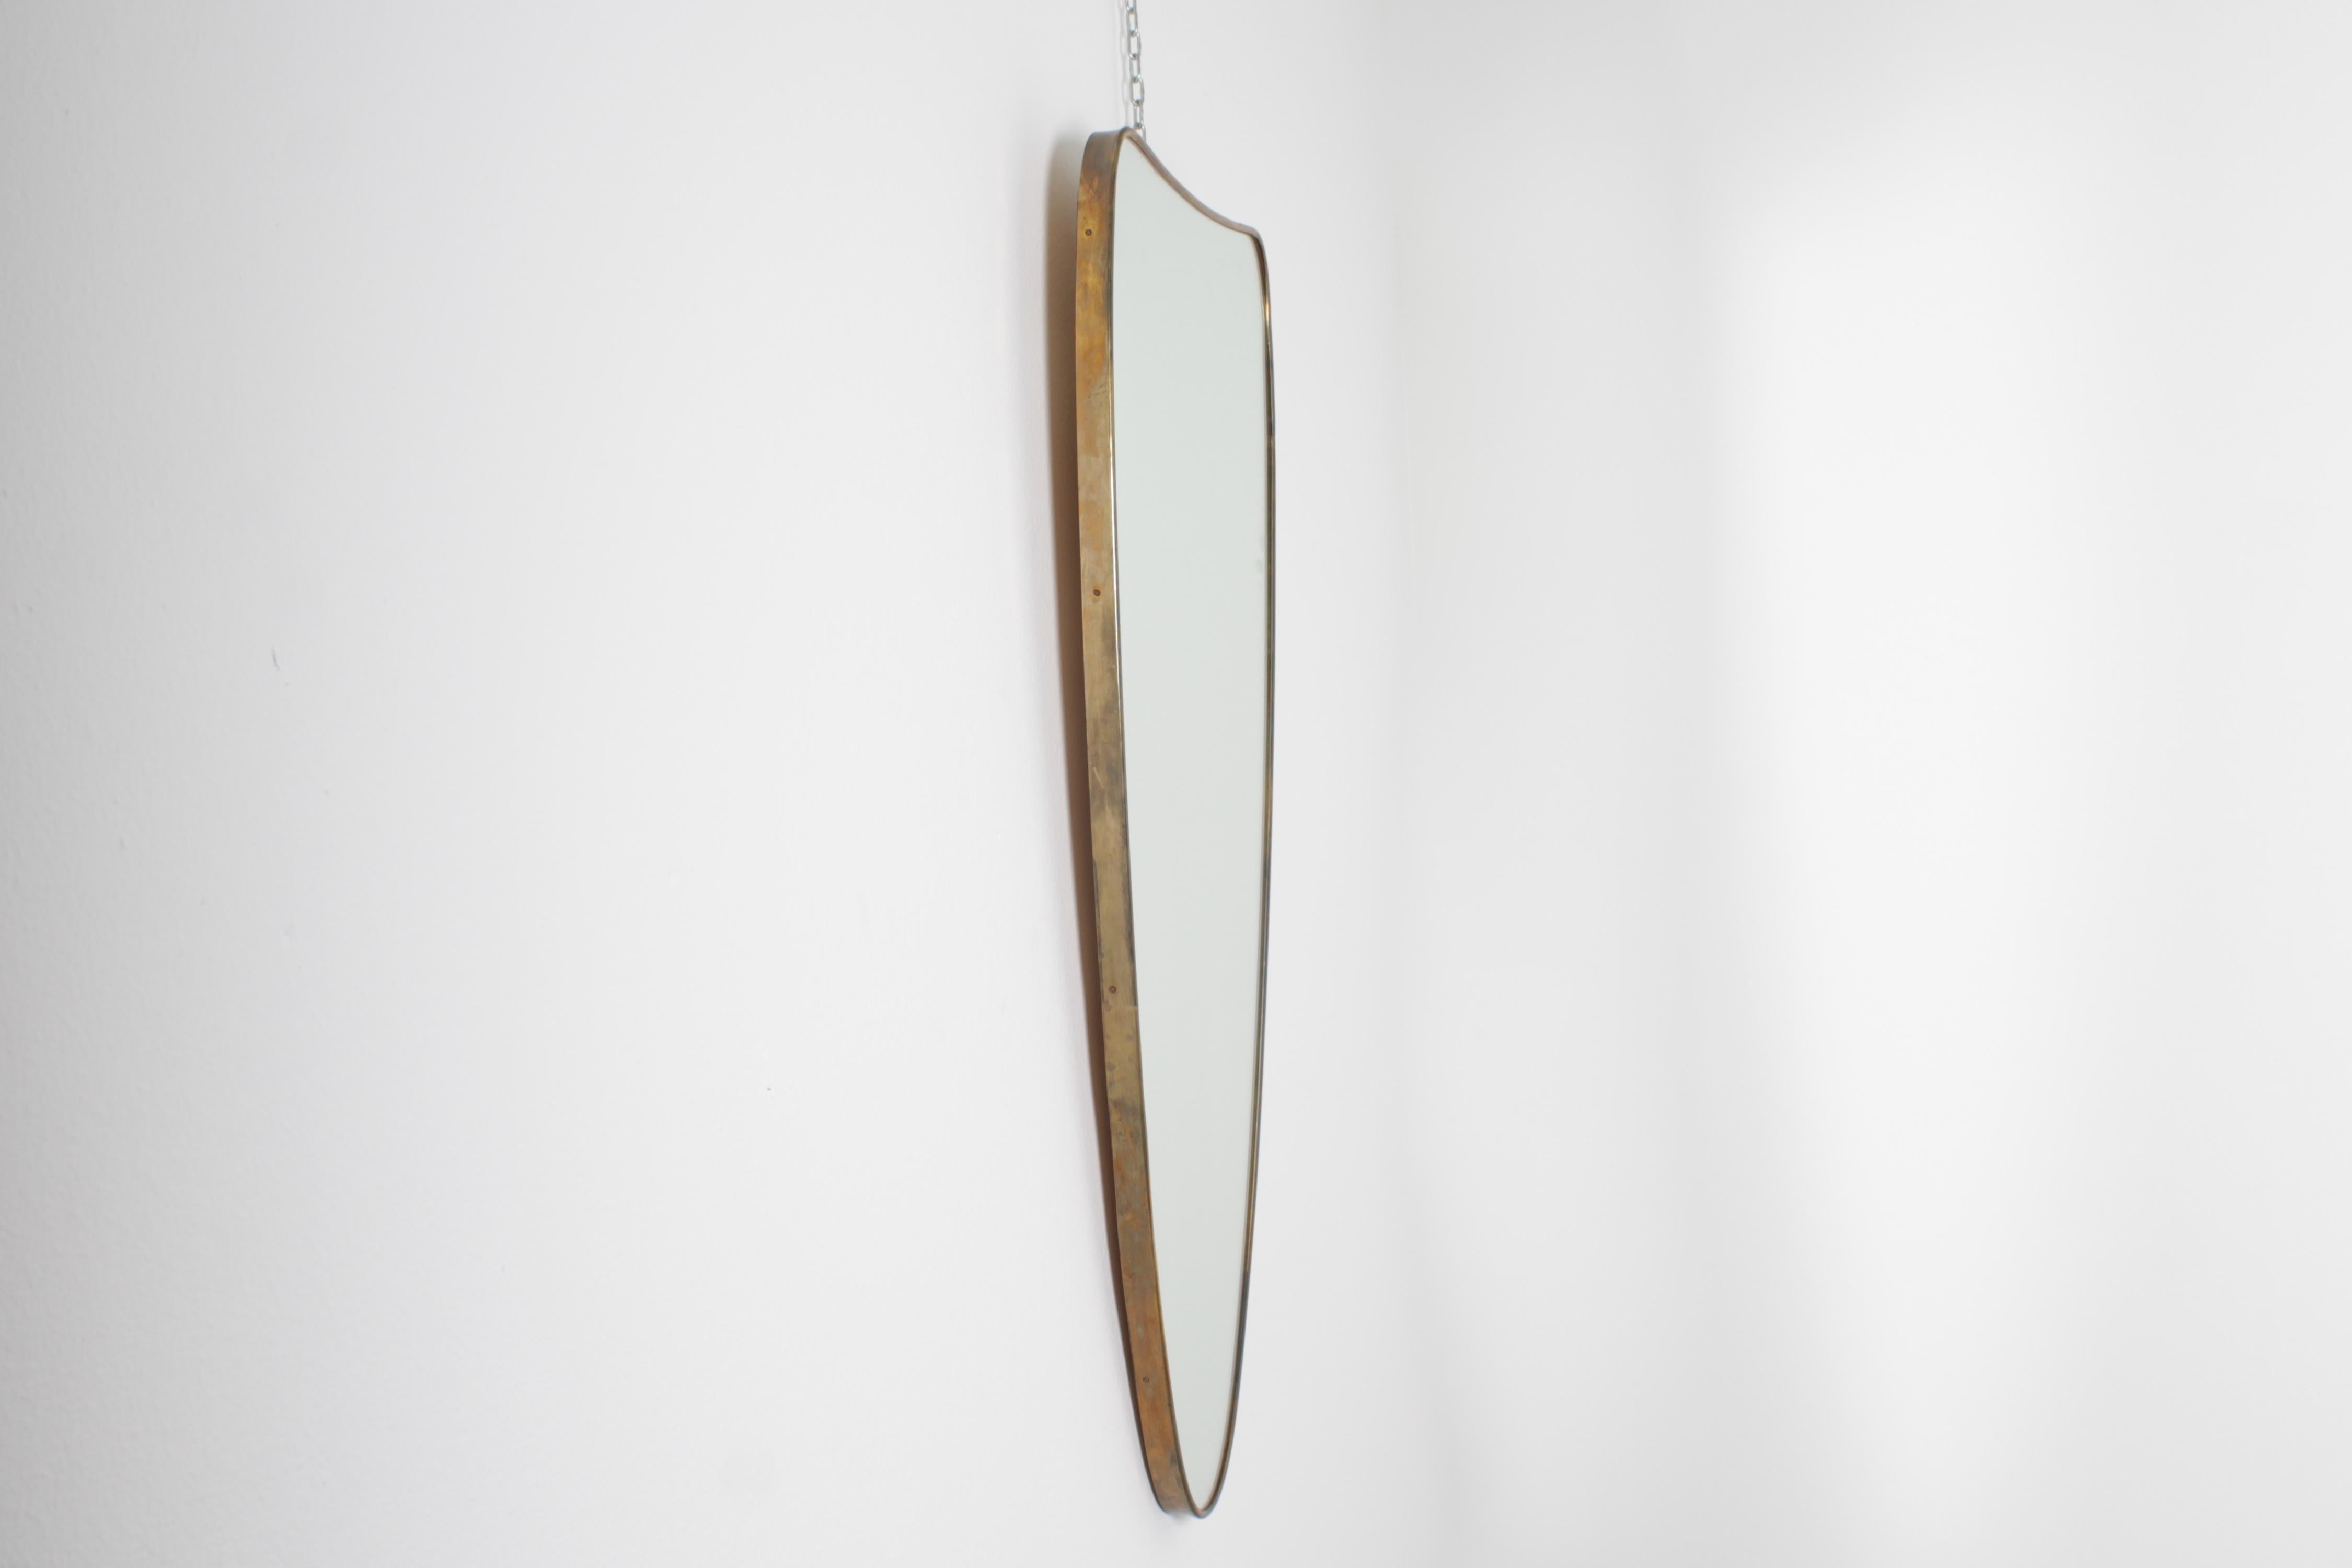 Italian Mid-Century G. Ponti Style Shield-Shaped Wall Mirror with Brass Frame 50s Italy For Sale